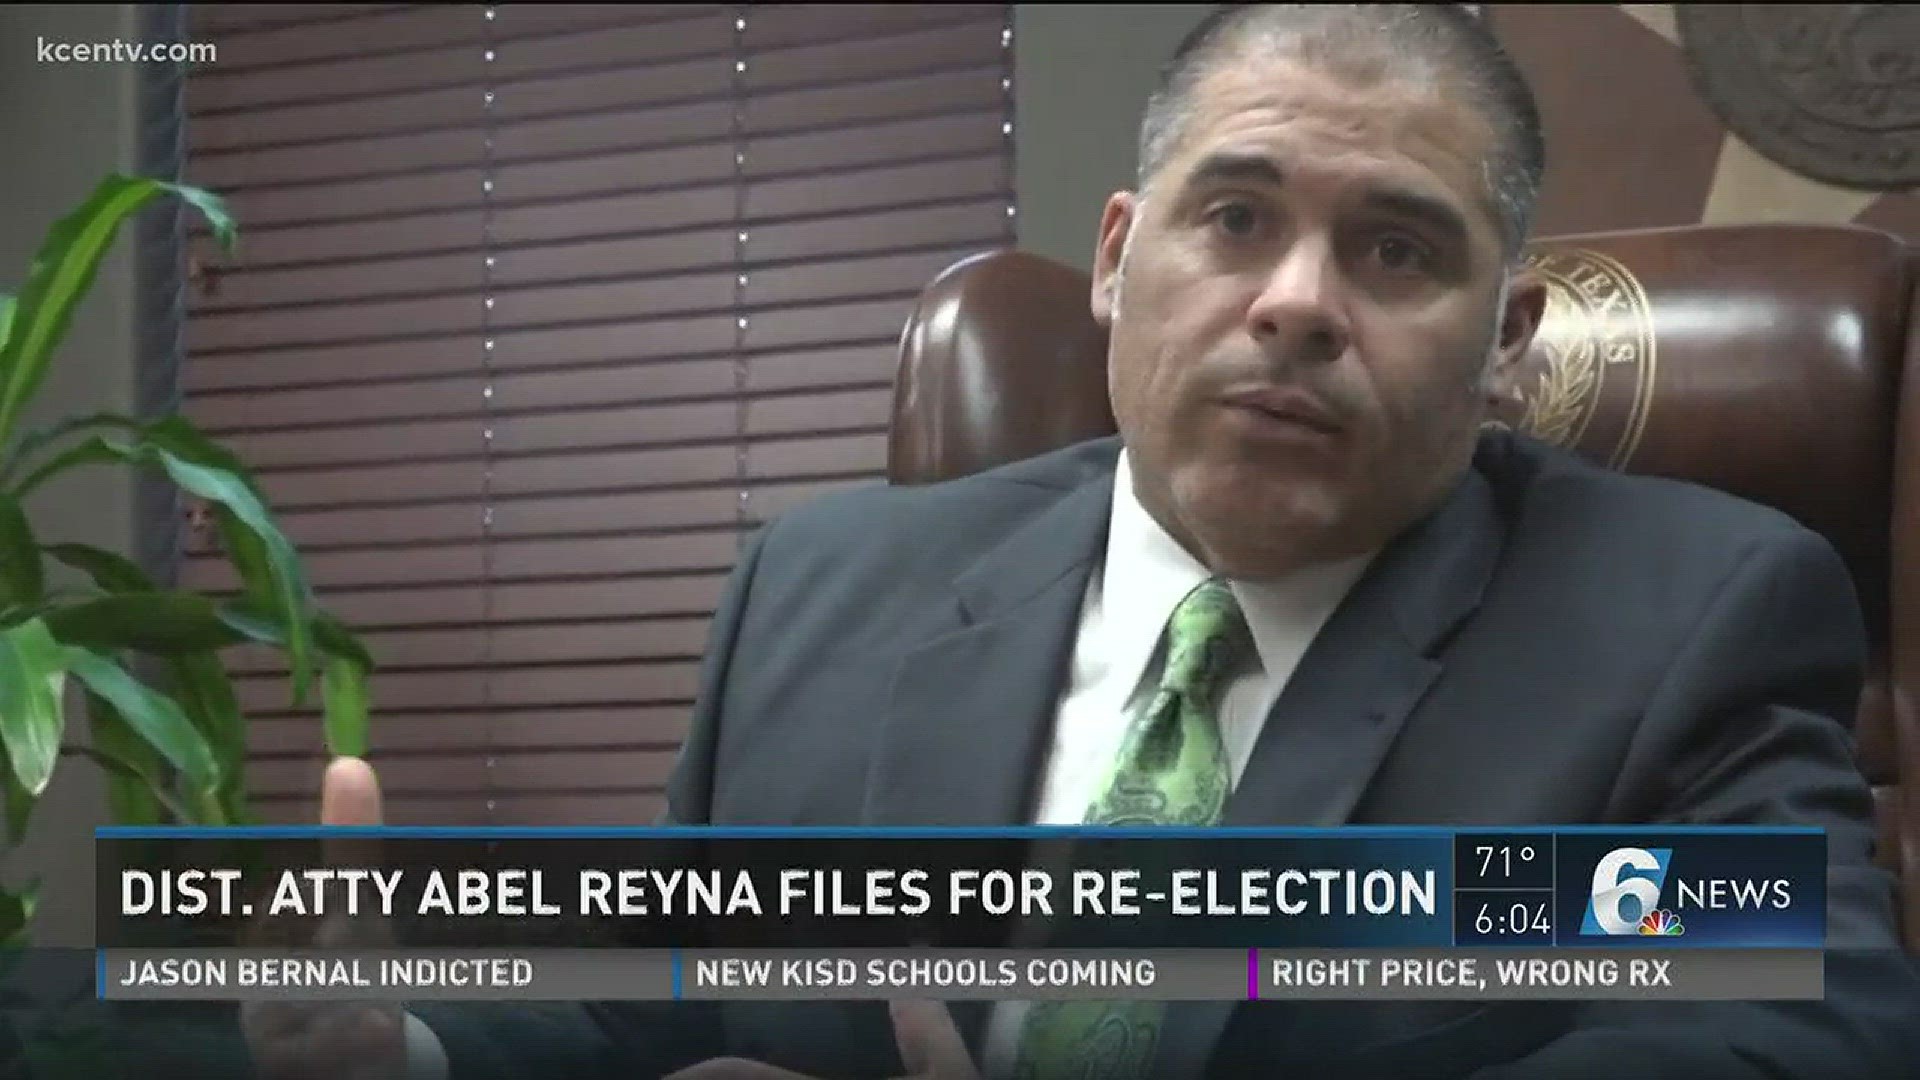 McLennan County District Attorney Abel Reyna officially kicked off his re-election campaign.